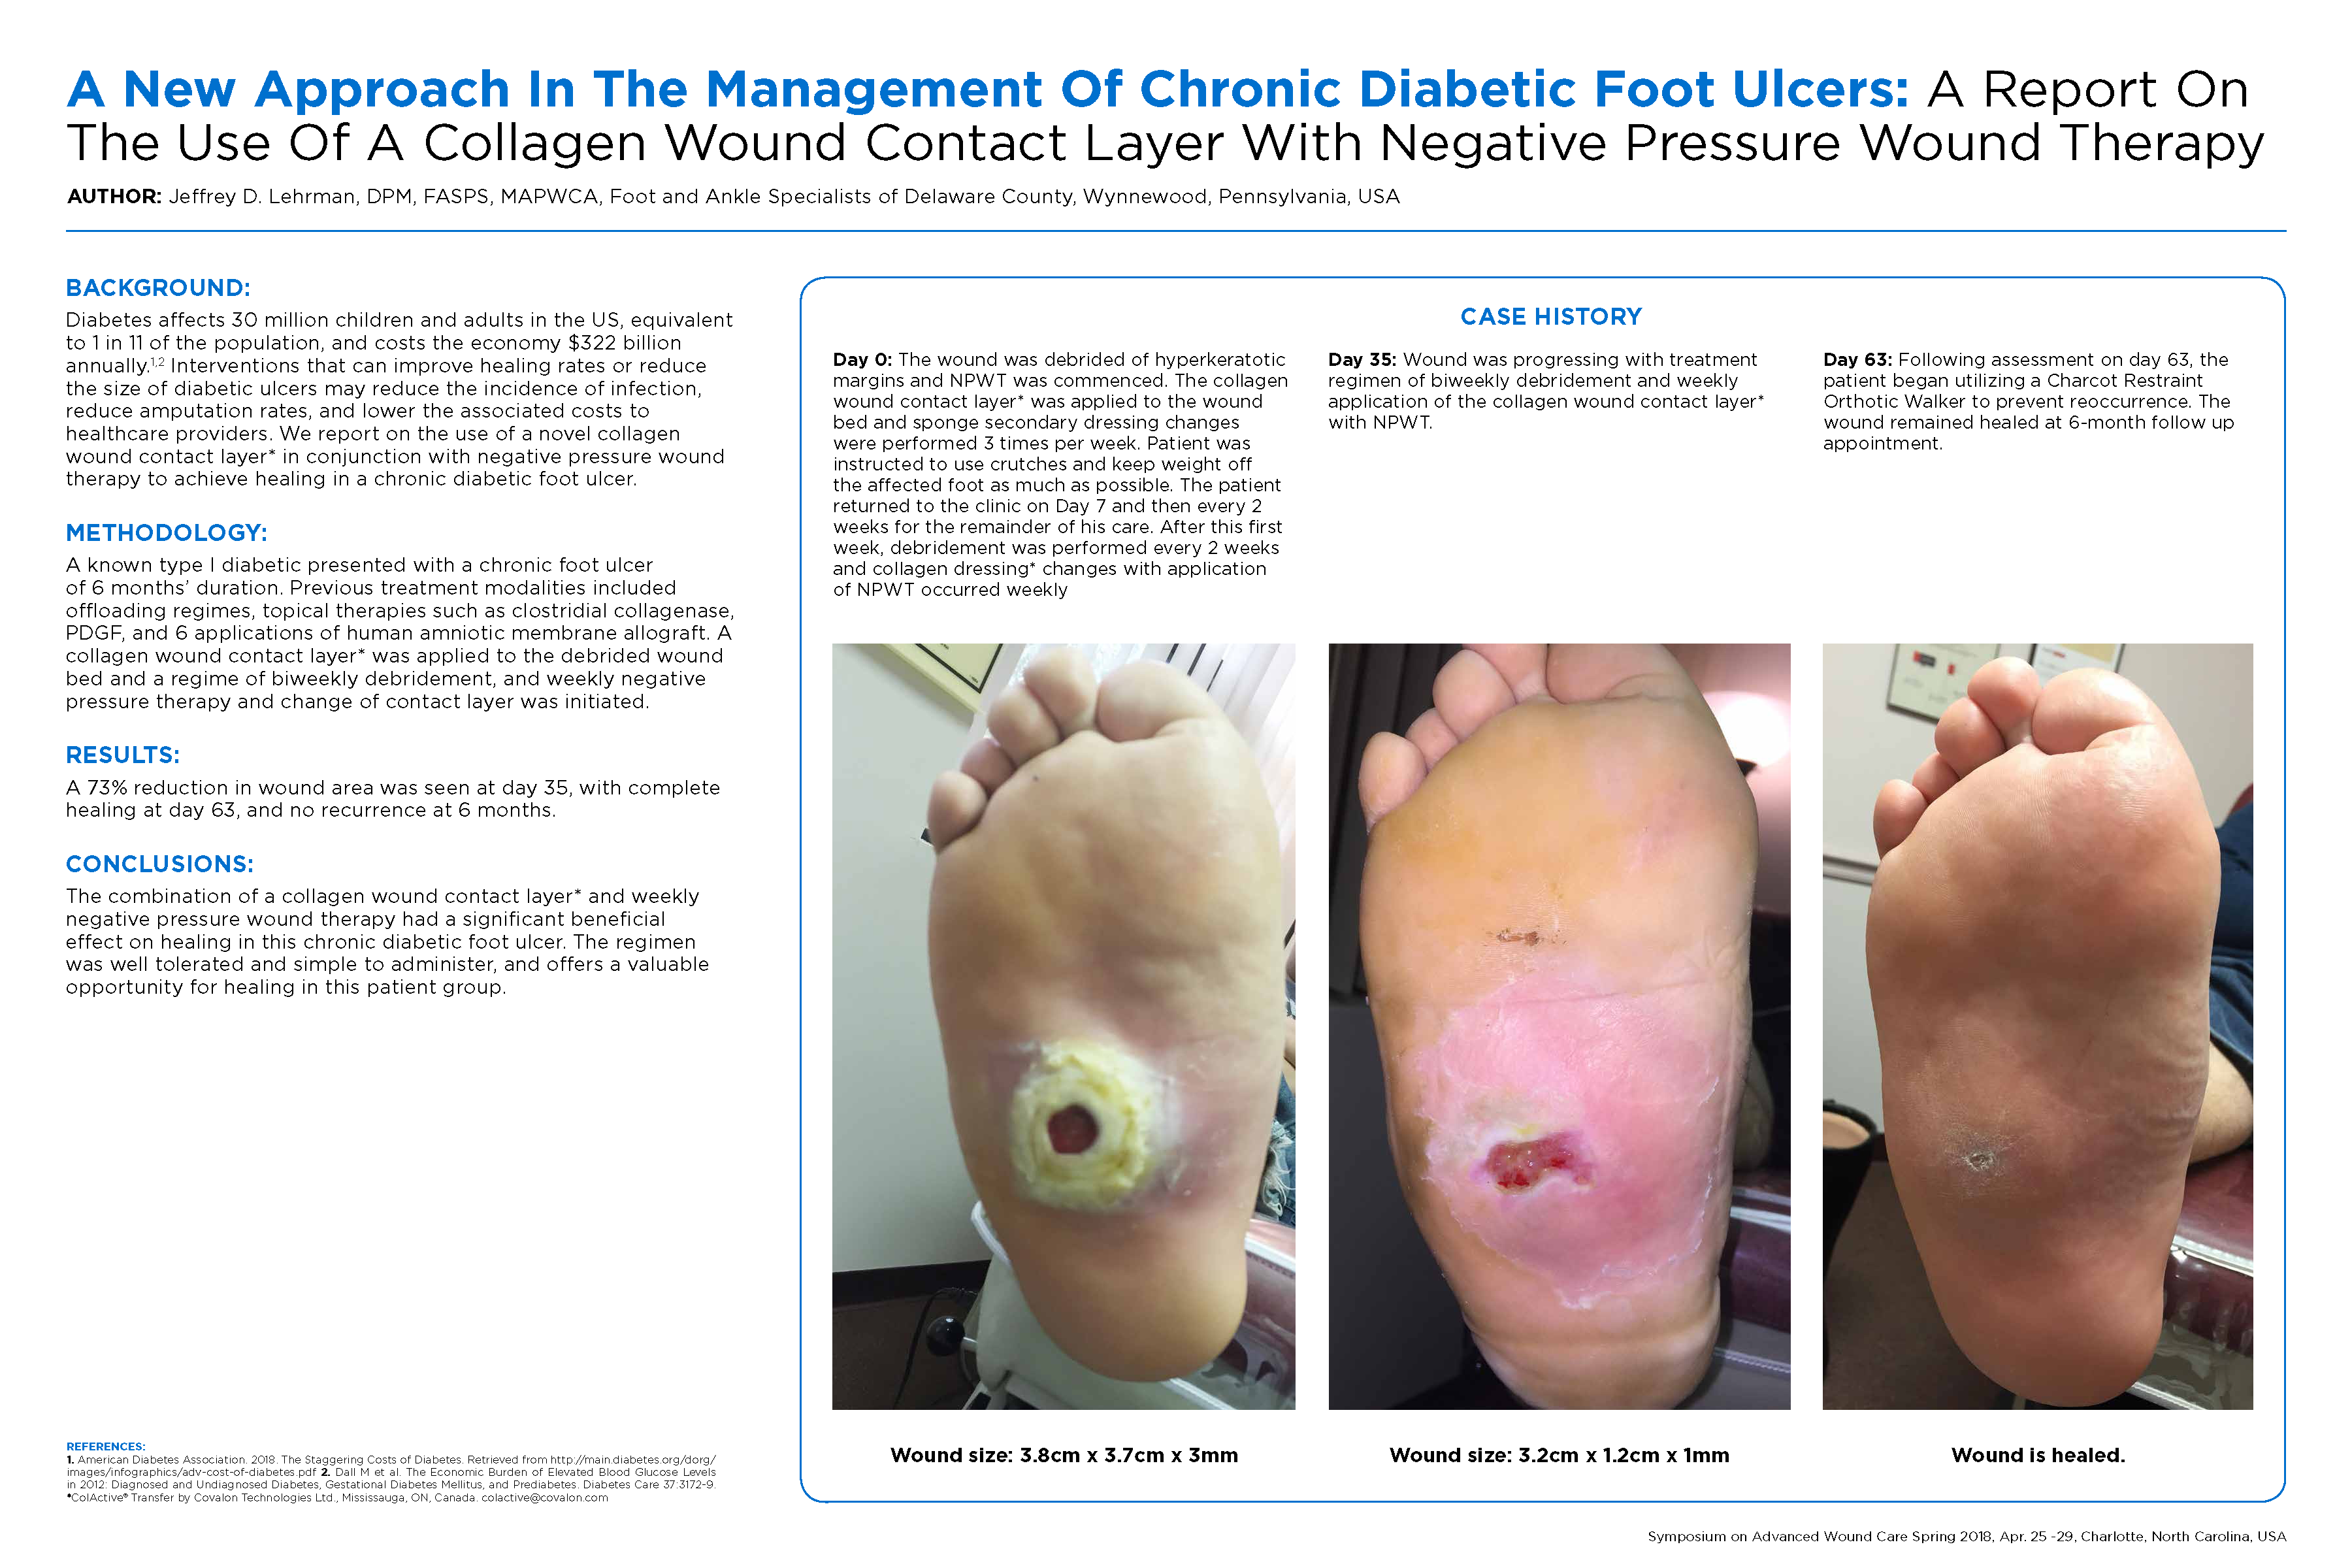 literature review on the management of diabetic foot ulcer